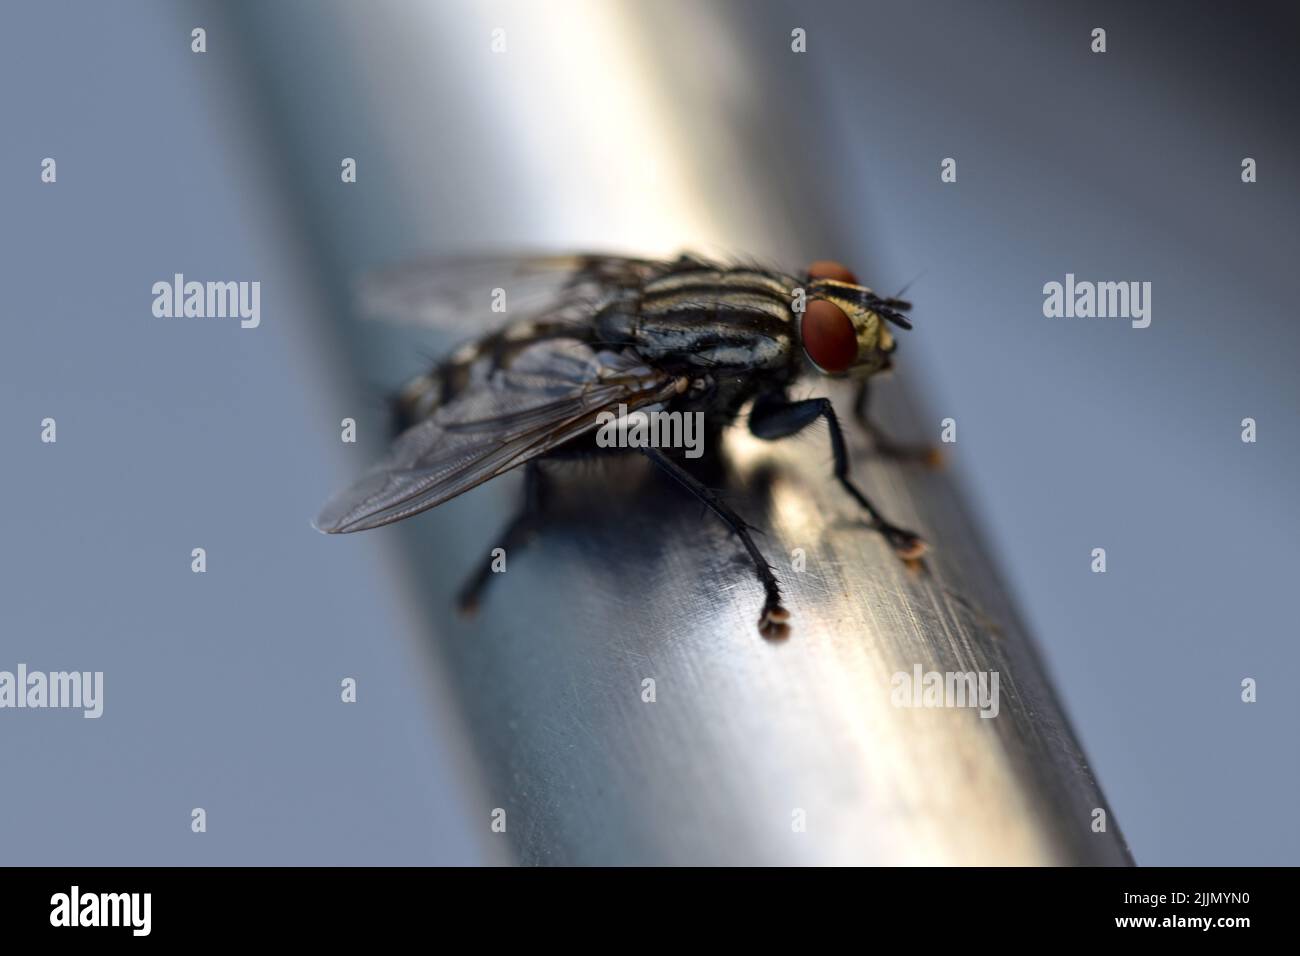 A closeup of housefly on metal stick Stock Photo